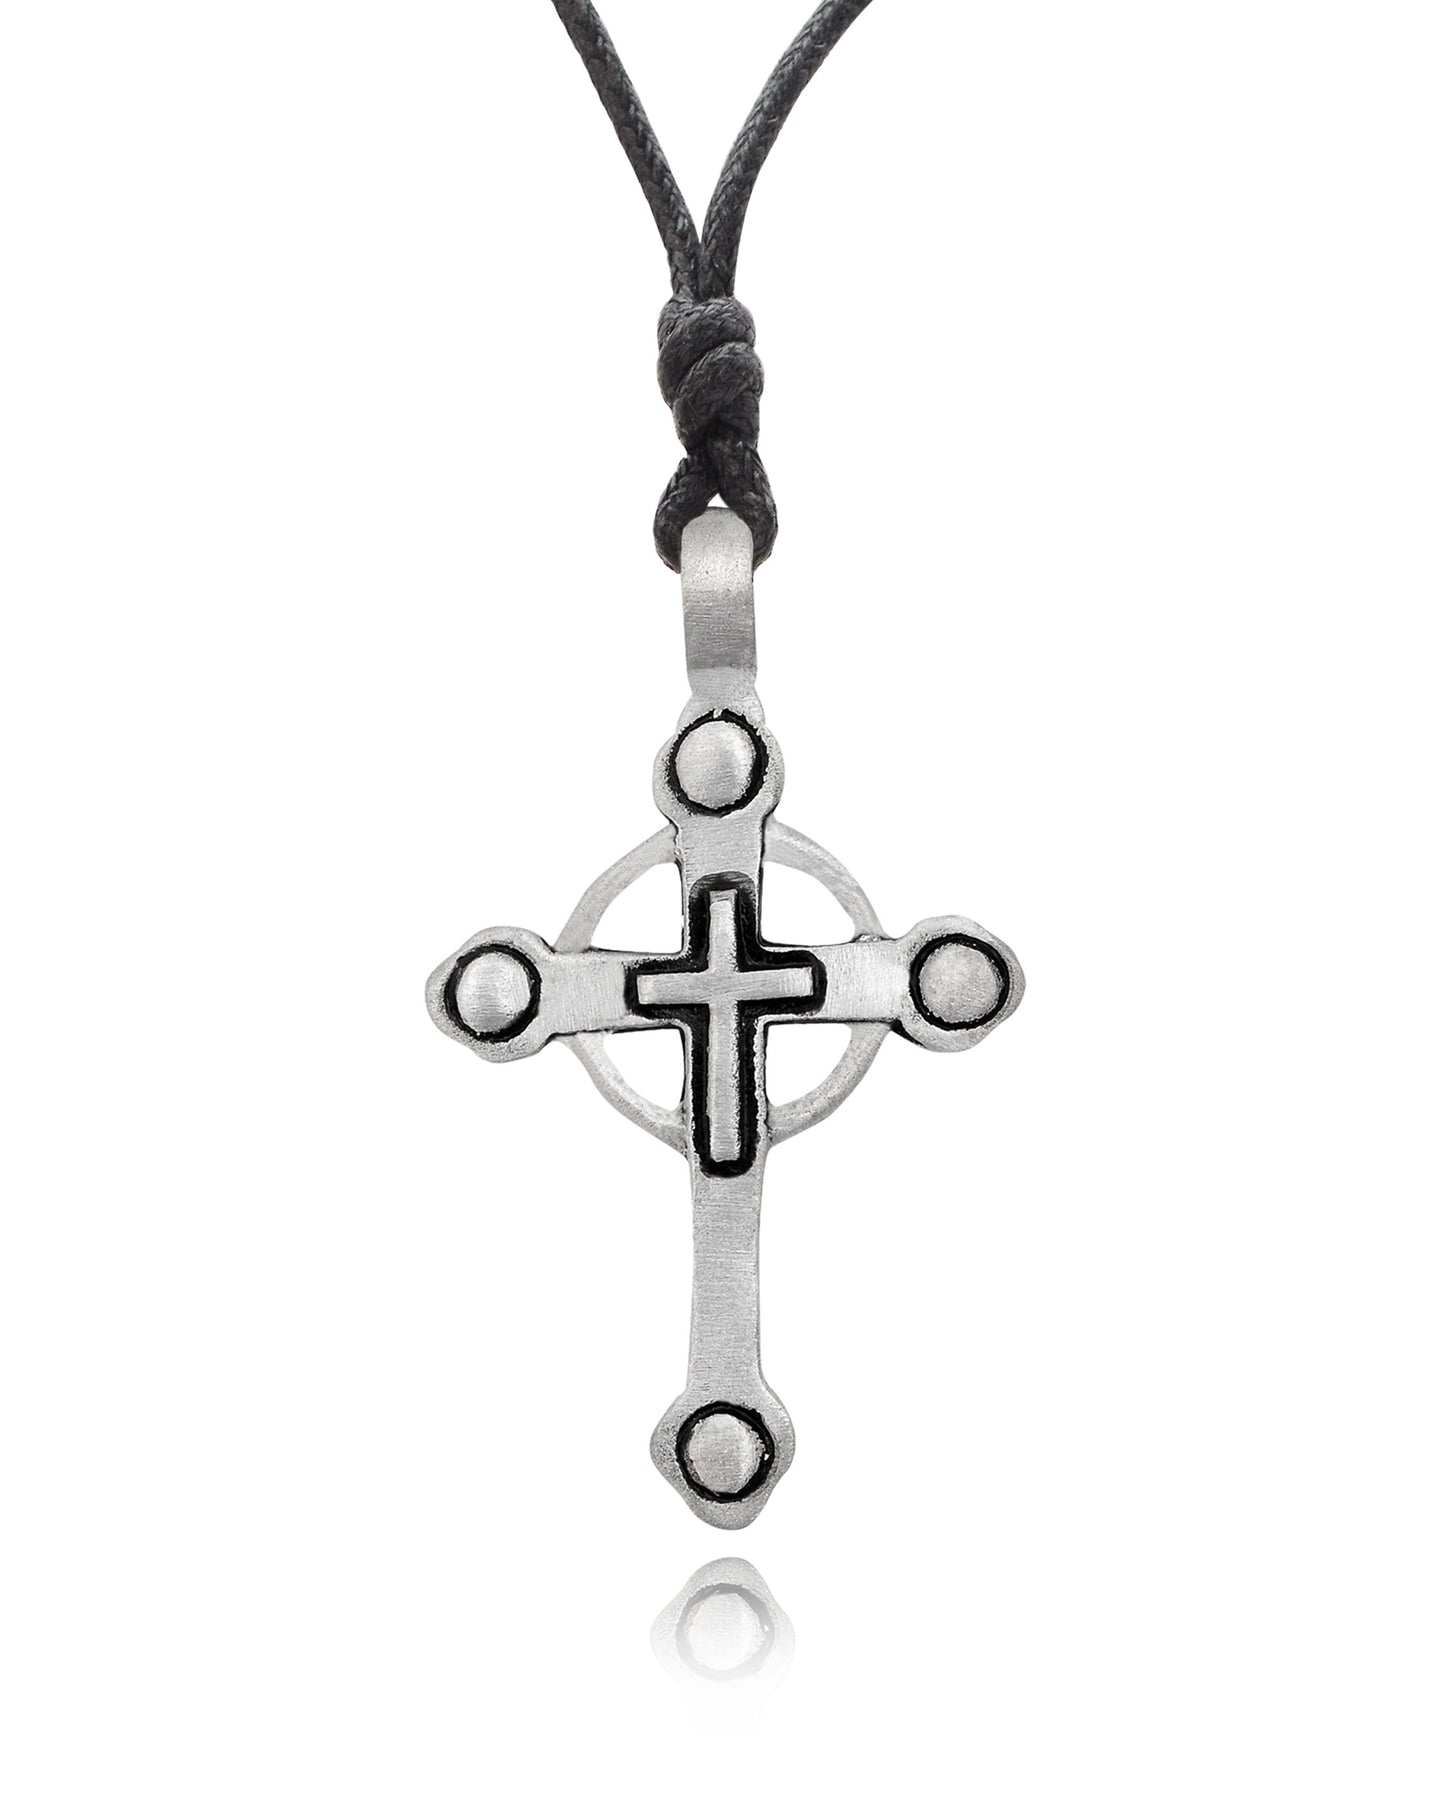 New Beautiful Cross Silver Pewter Charm Necklace Pendant Jewelry